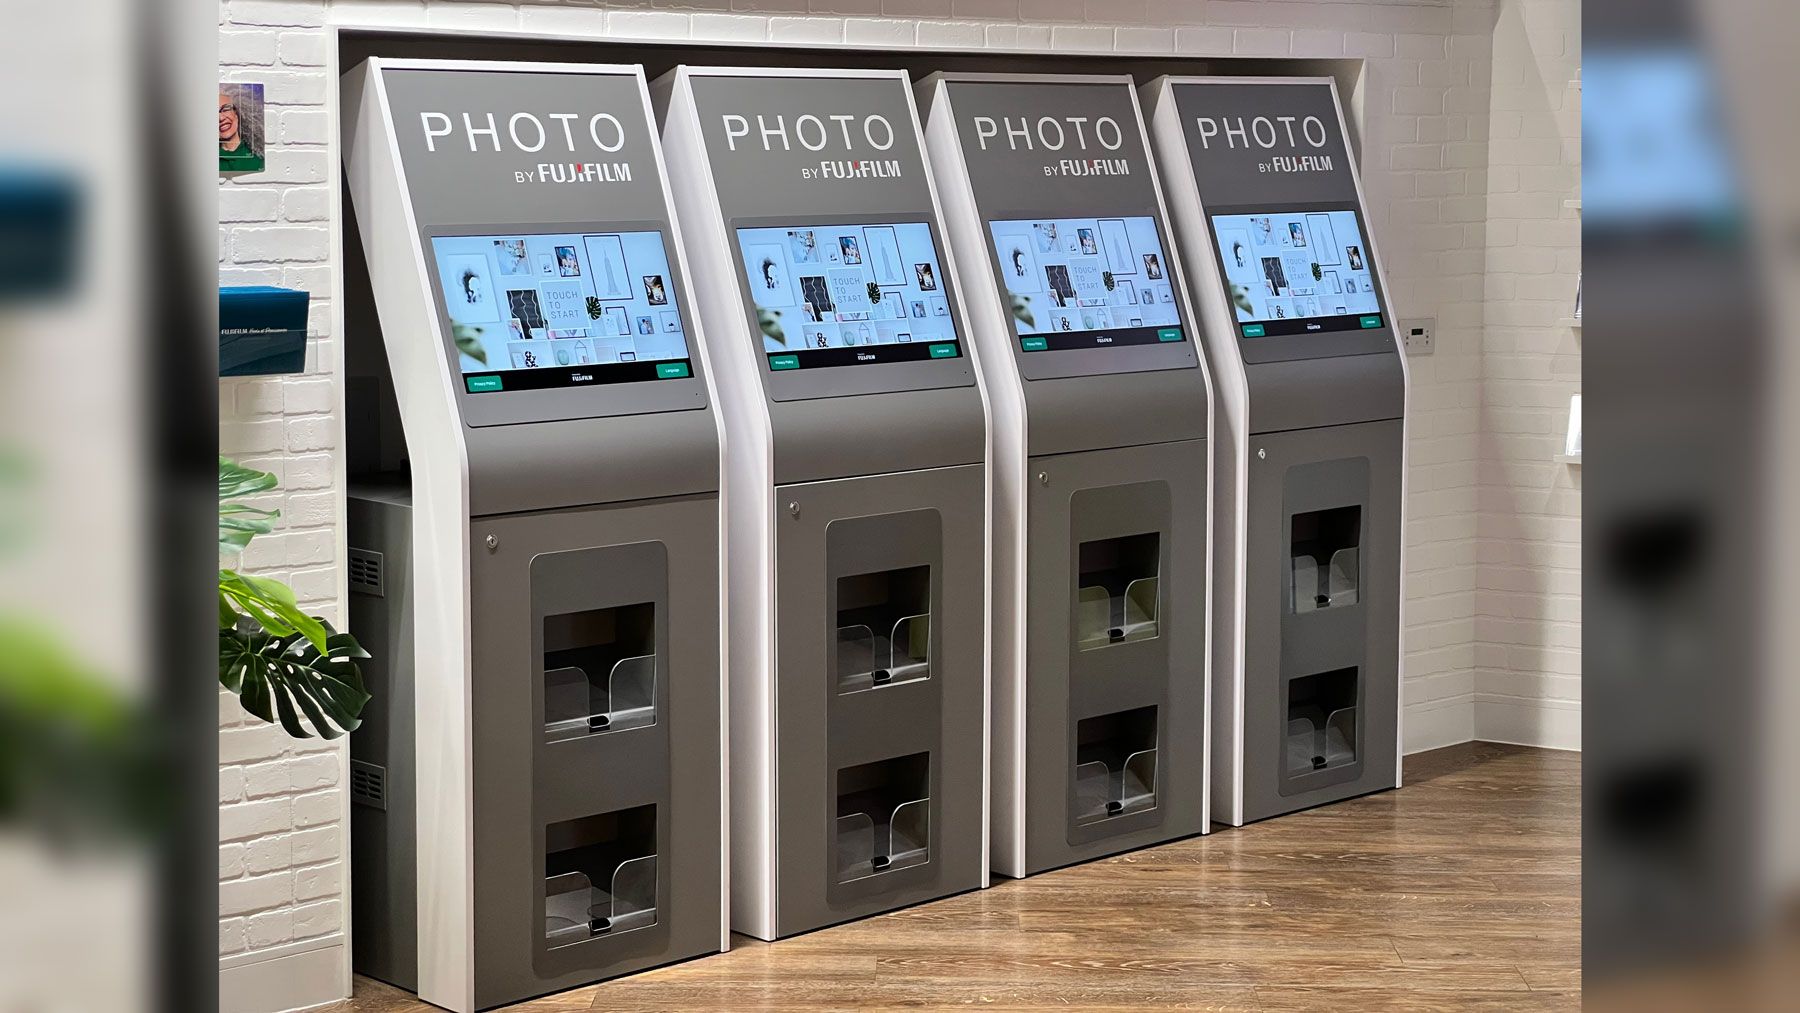 Photo Printing : Printing : Services at Convenience Stores : Solutions :  FUJIFILM Business Innovation